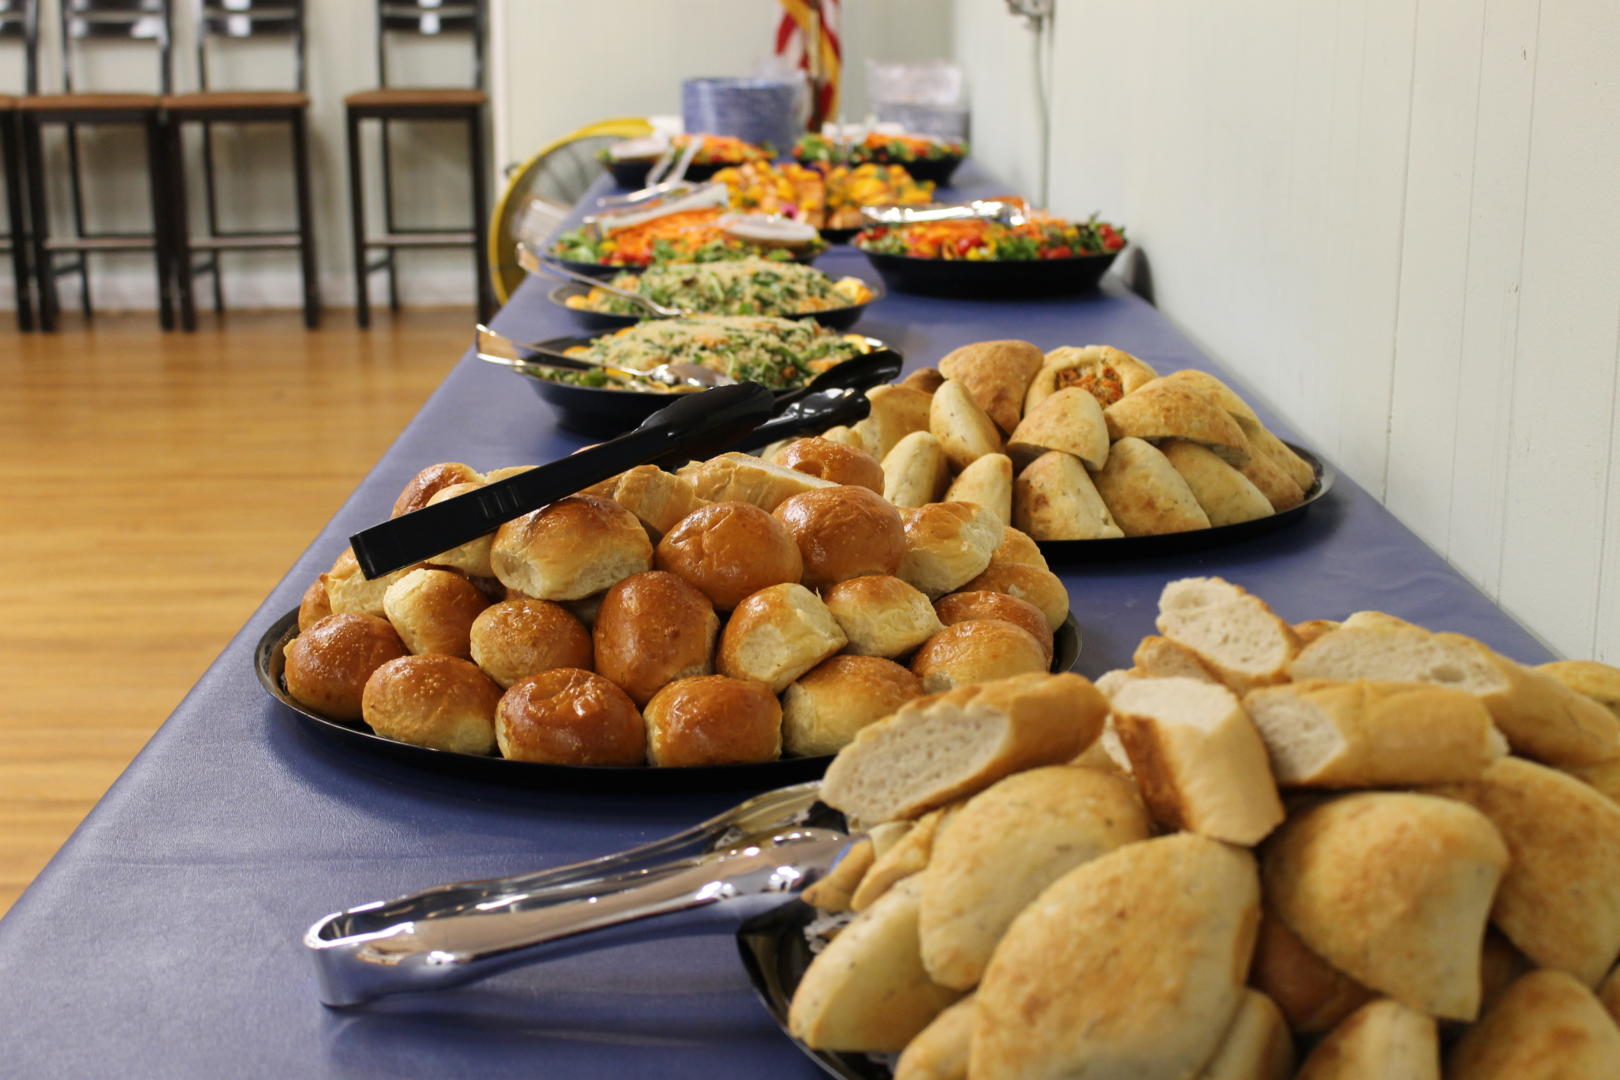 Food for the event was donated by Catering by Andrew. (Photo Courtesy Town of Brookline)